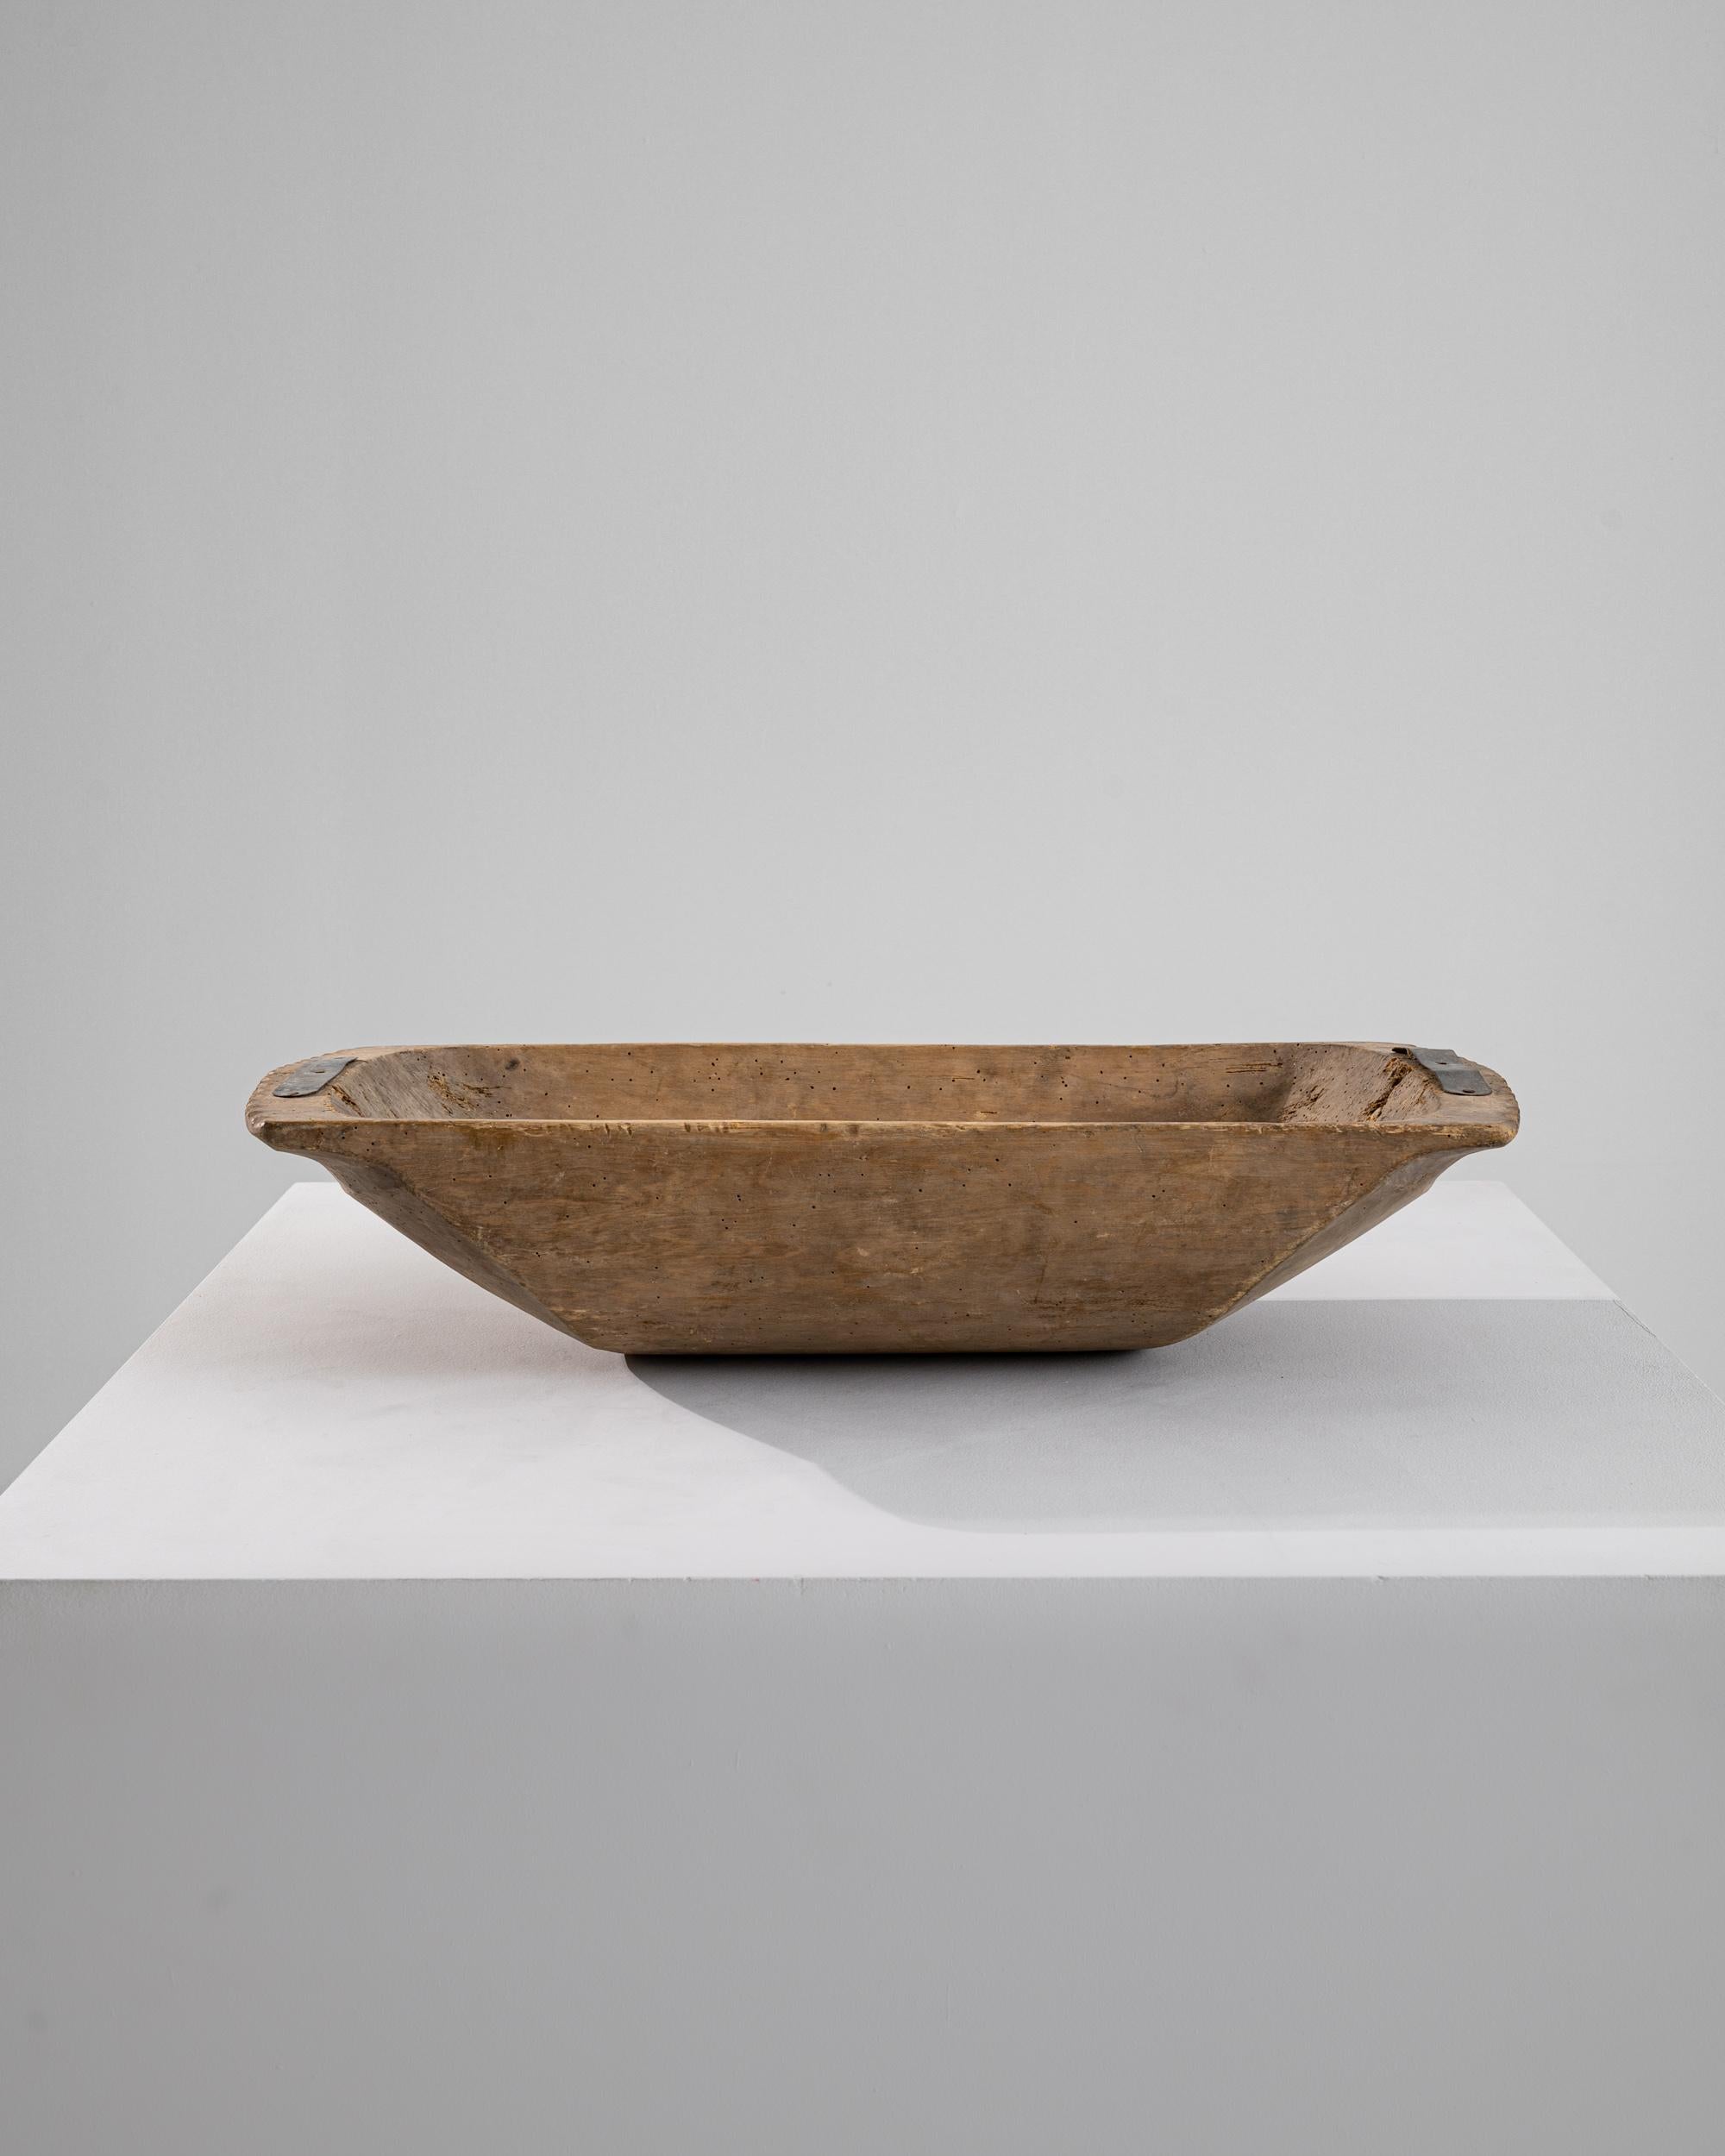 A wooden bowl made in 1900s central Europe. A simple yet curious artifact, this bowl was created from hollowing out one solid piece of wood. Once used to hold rising dough, weathered metal bands and networks of aged and gnarled wood remind of its